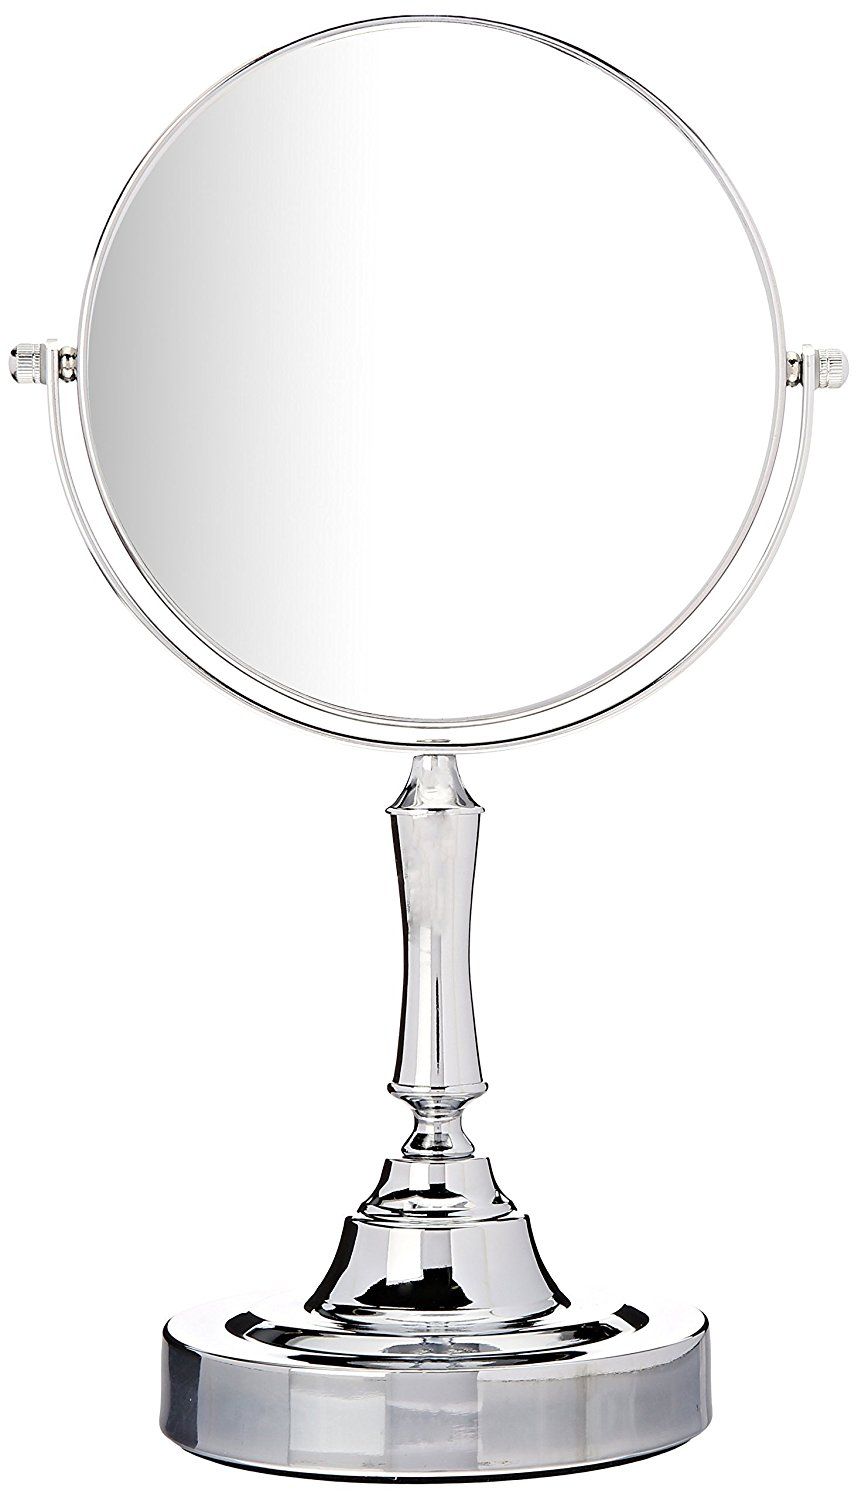 4 makeup mirrors that will satisfy every budget & vanity